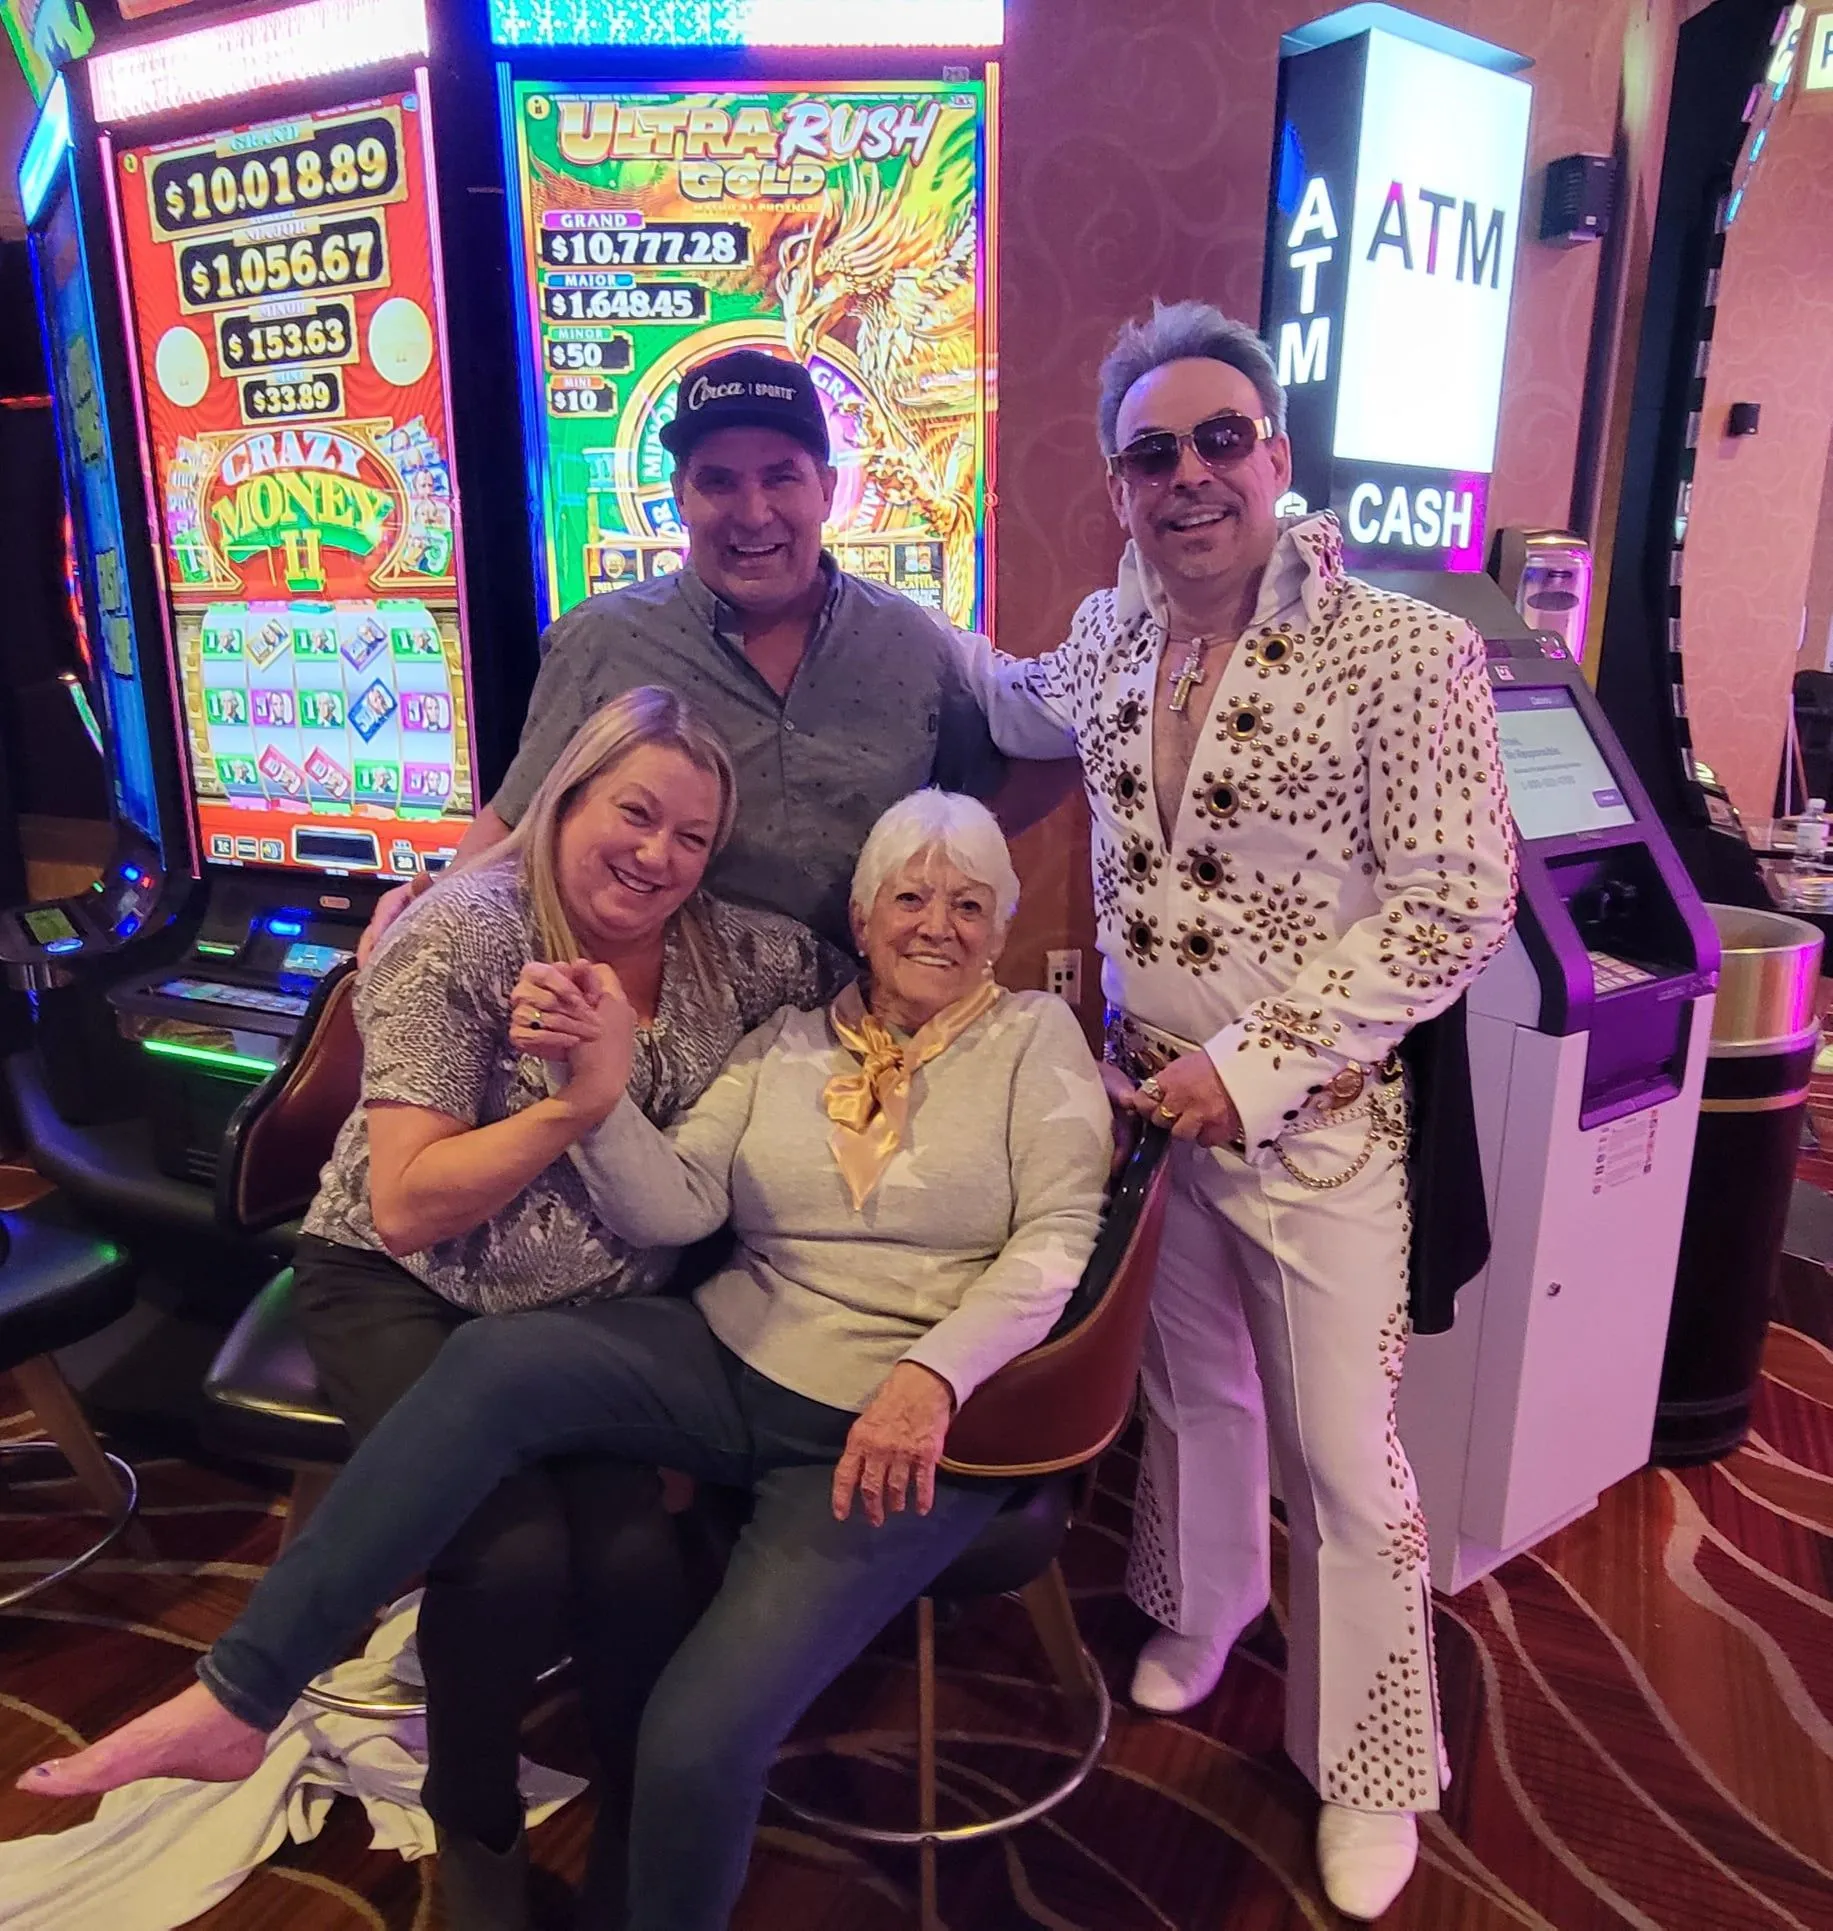 Jimmi Ellis with fans at TThe Pass Casino Henderson NV